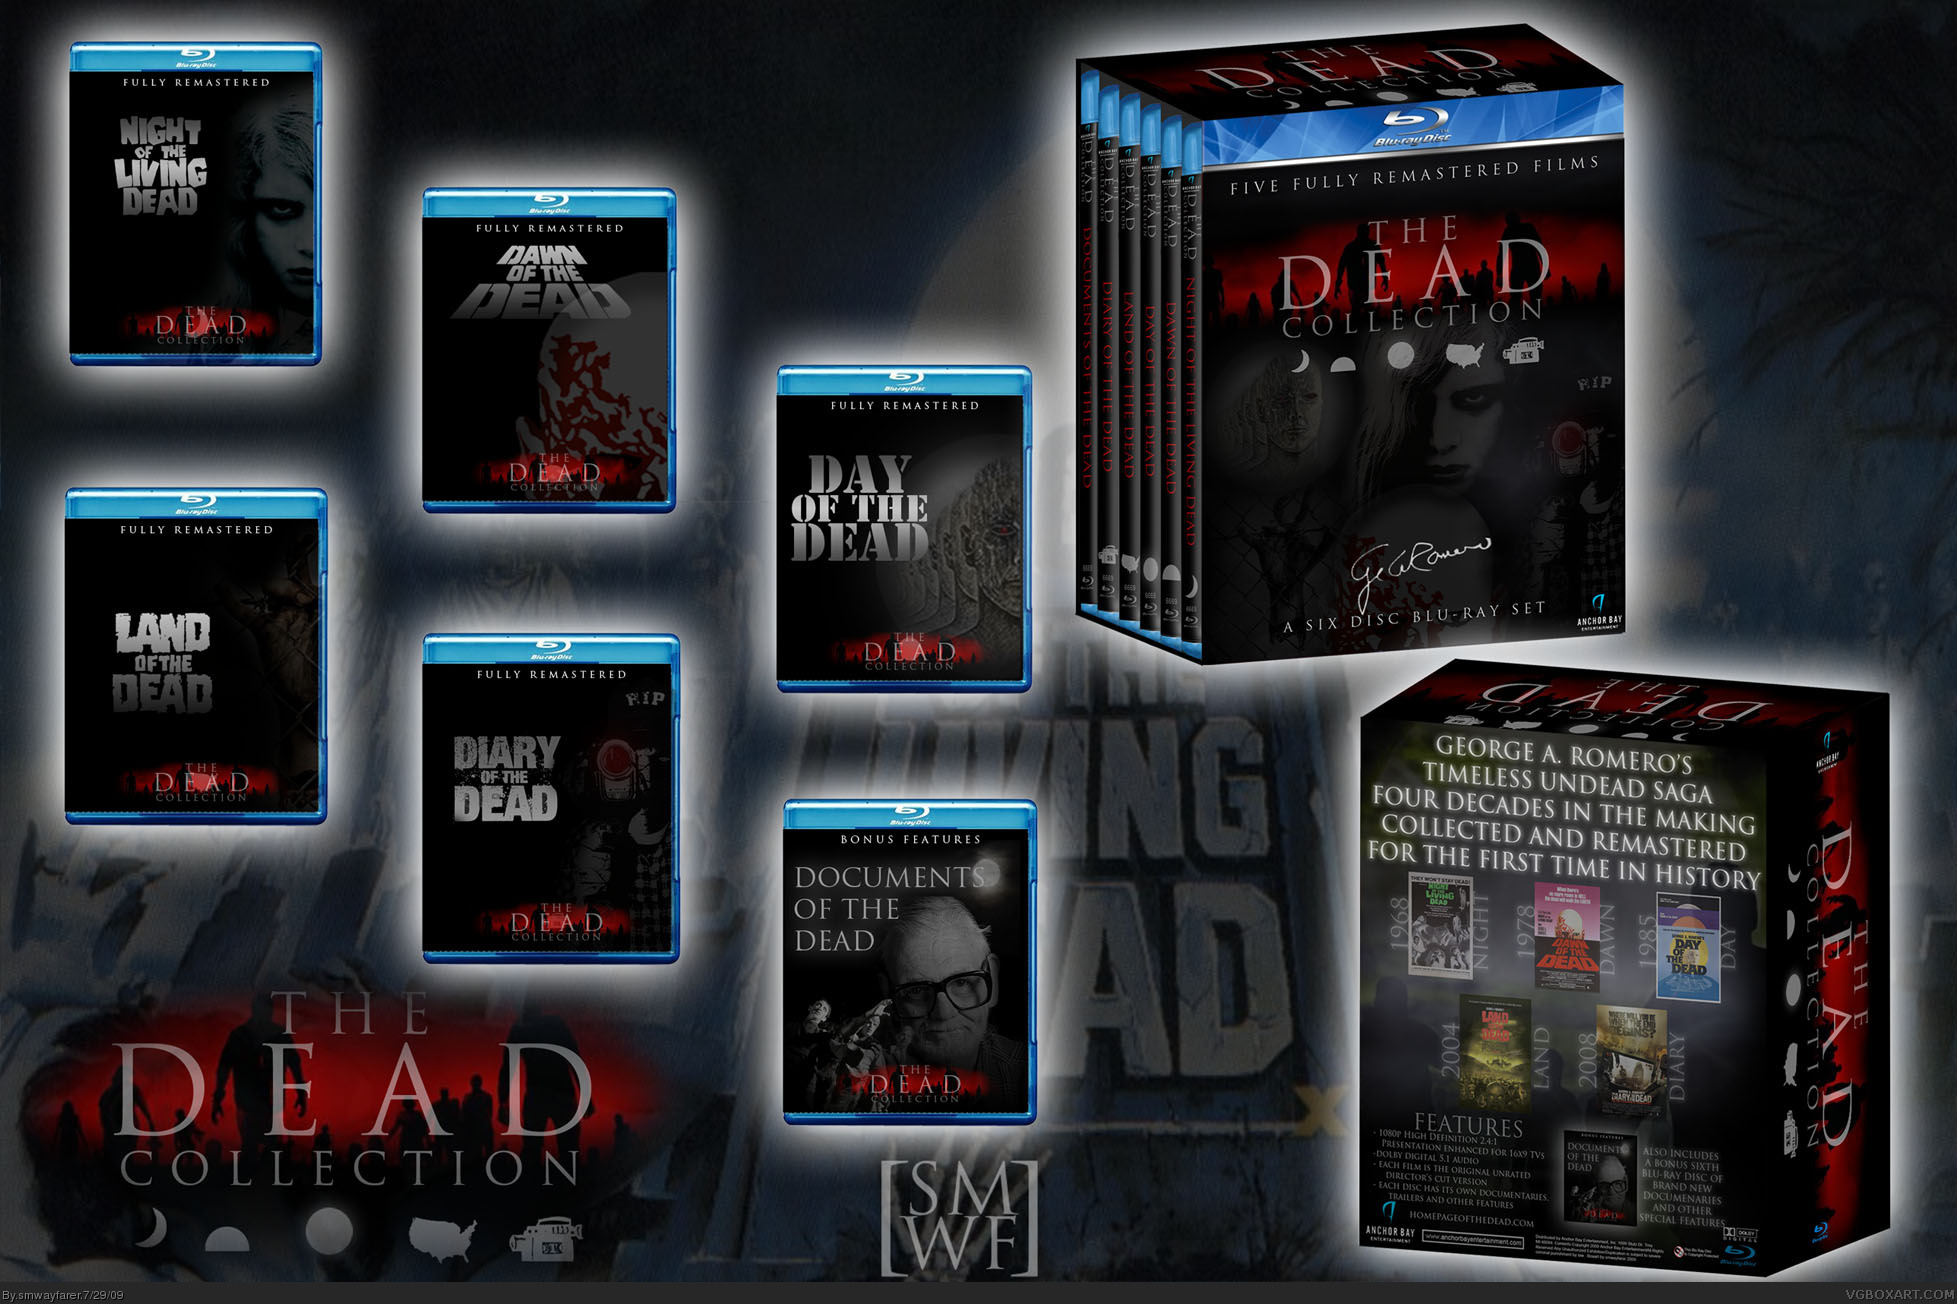 The Dead Collection box cover